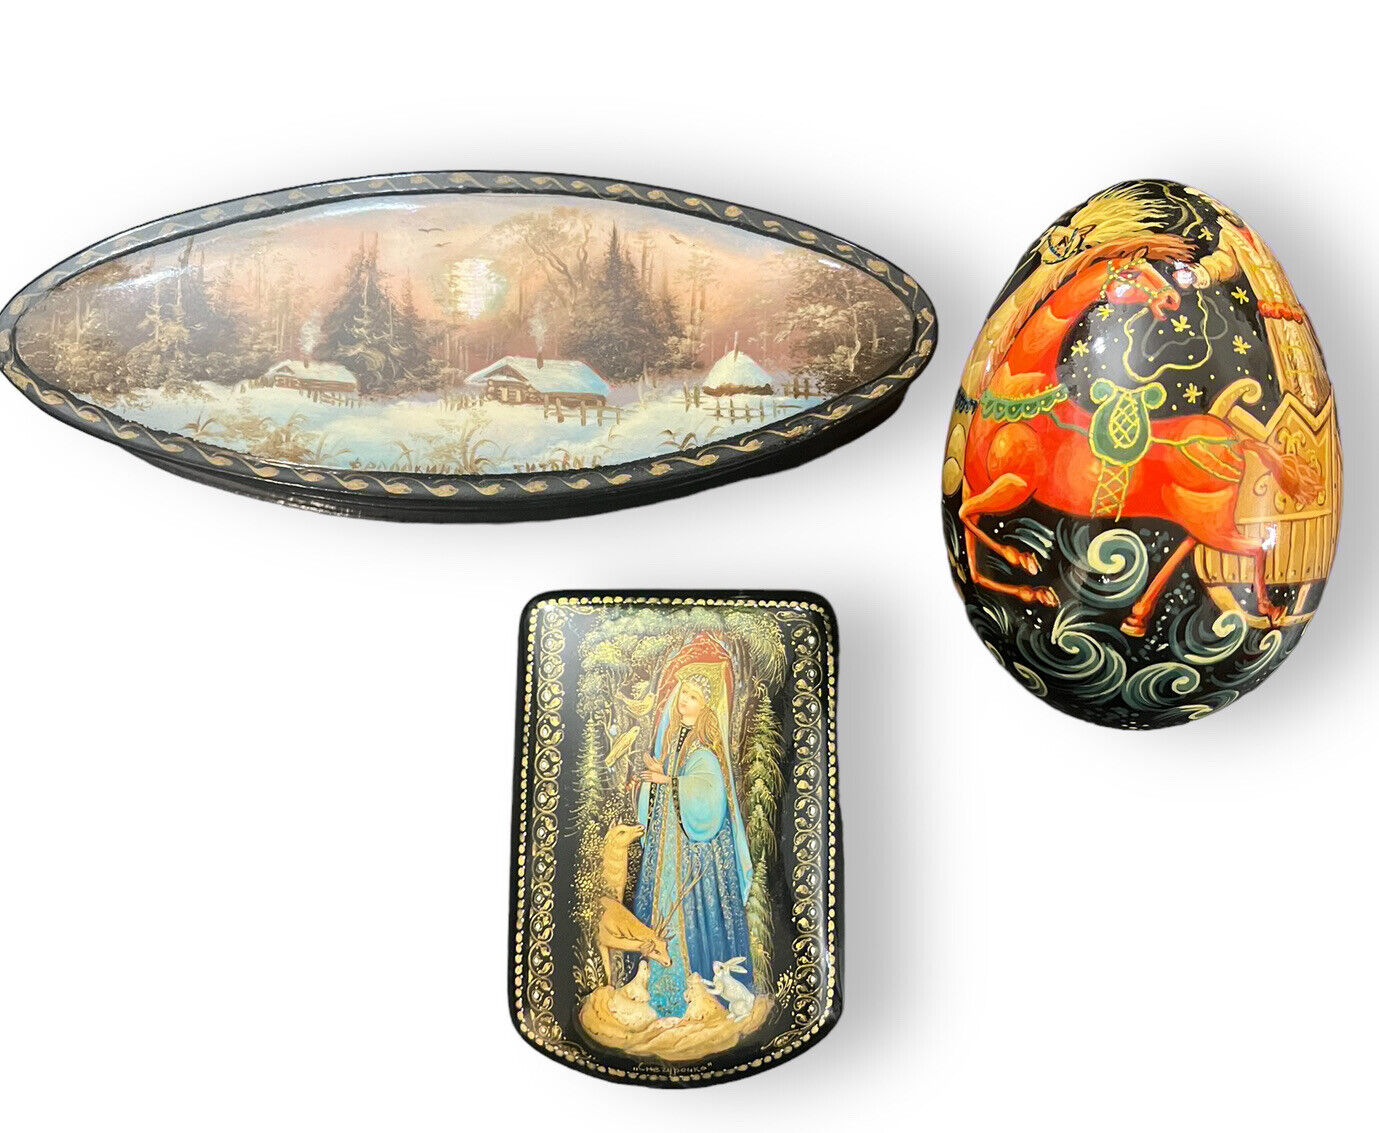 Russian Lacquer Hand Painted and Signed Trio: 2 Boxes and 1 Egg Mother of Pearl